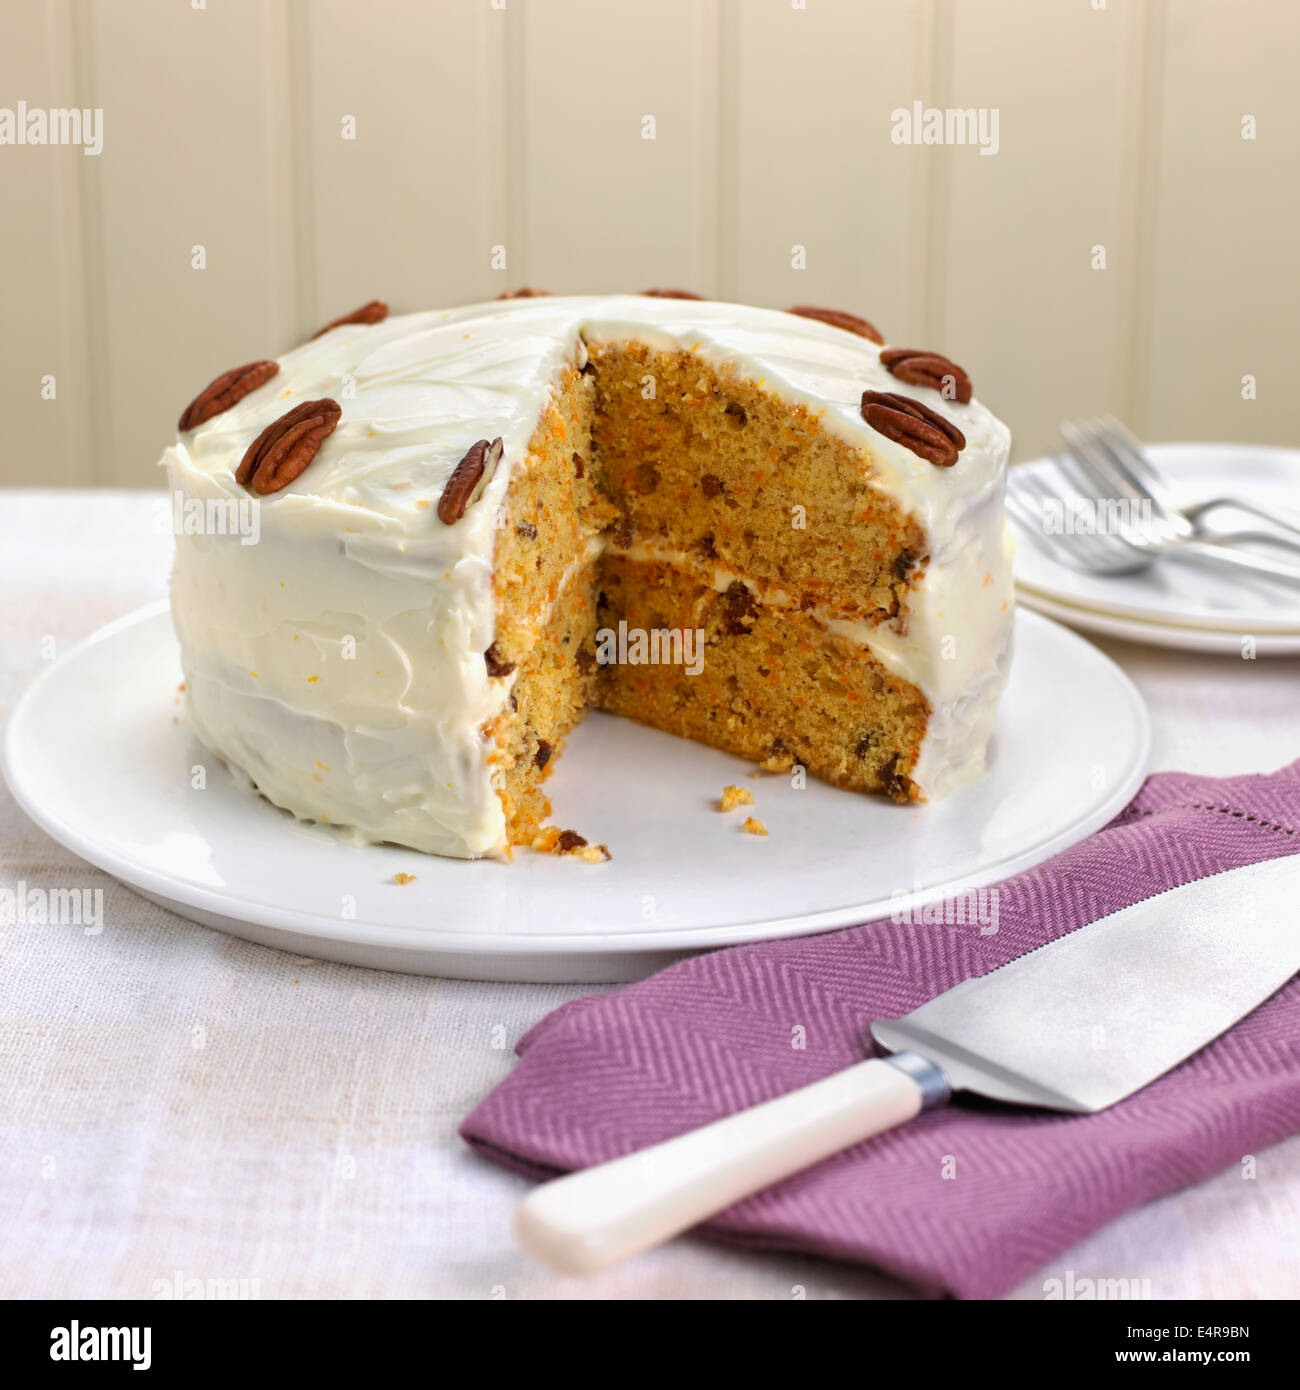 Pecan carrot cake with orange and mascarpone frosting Stock Photo